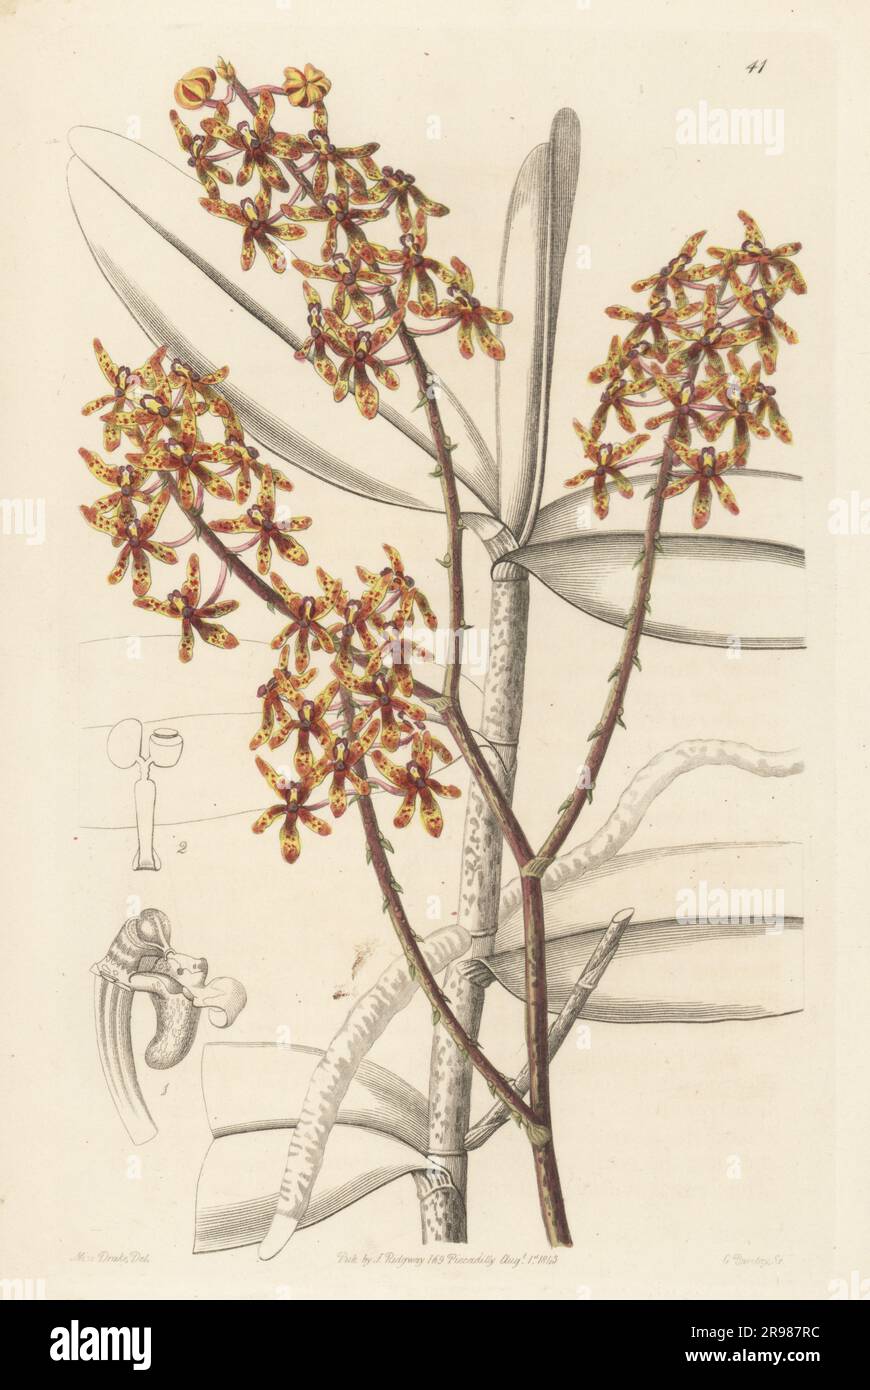 Early blooming renanthera or morning renanthera orchid, Renanthera matutina. Native to Indonesia and Malaysia. Sent by Hugh Cuming from Manila and flowered at Chatsworth. Handcoloured copperplate engraving by George Barclay after a botanical illustration by Sarah Drake from Edwards’ Botanical Register, continued by John Lindley, published by James Ridgway, London, 1843. Stock Photo